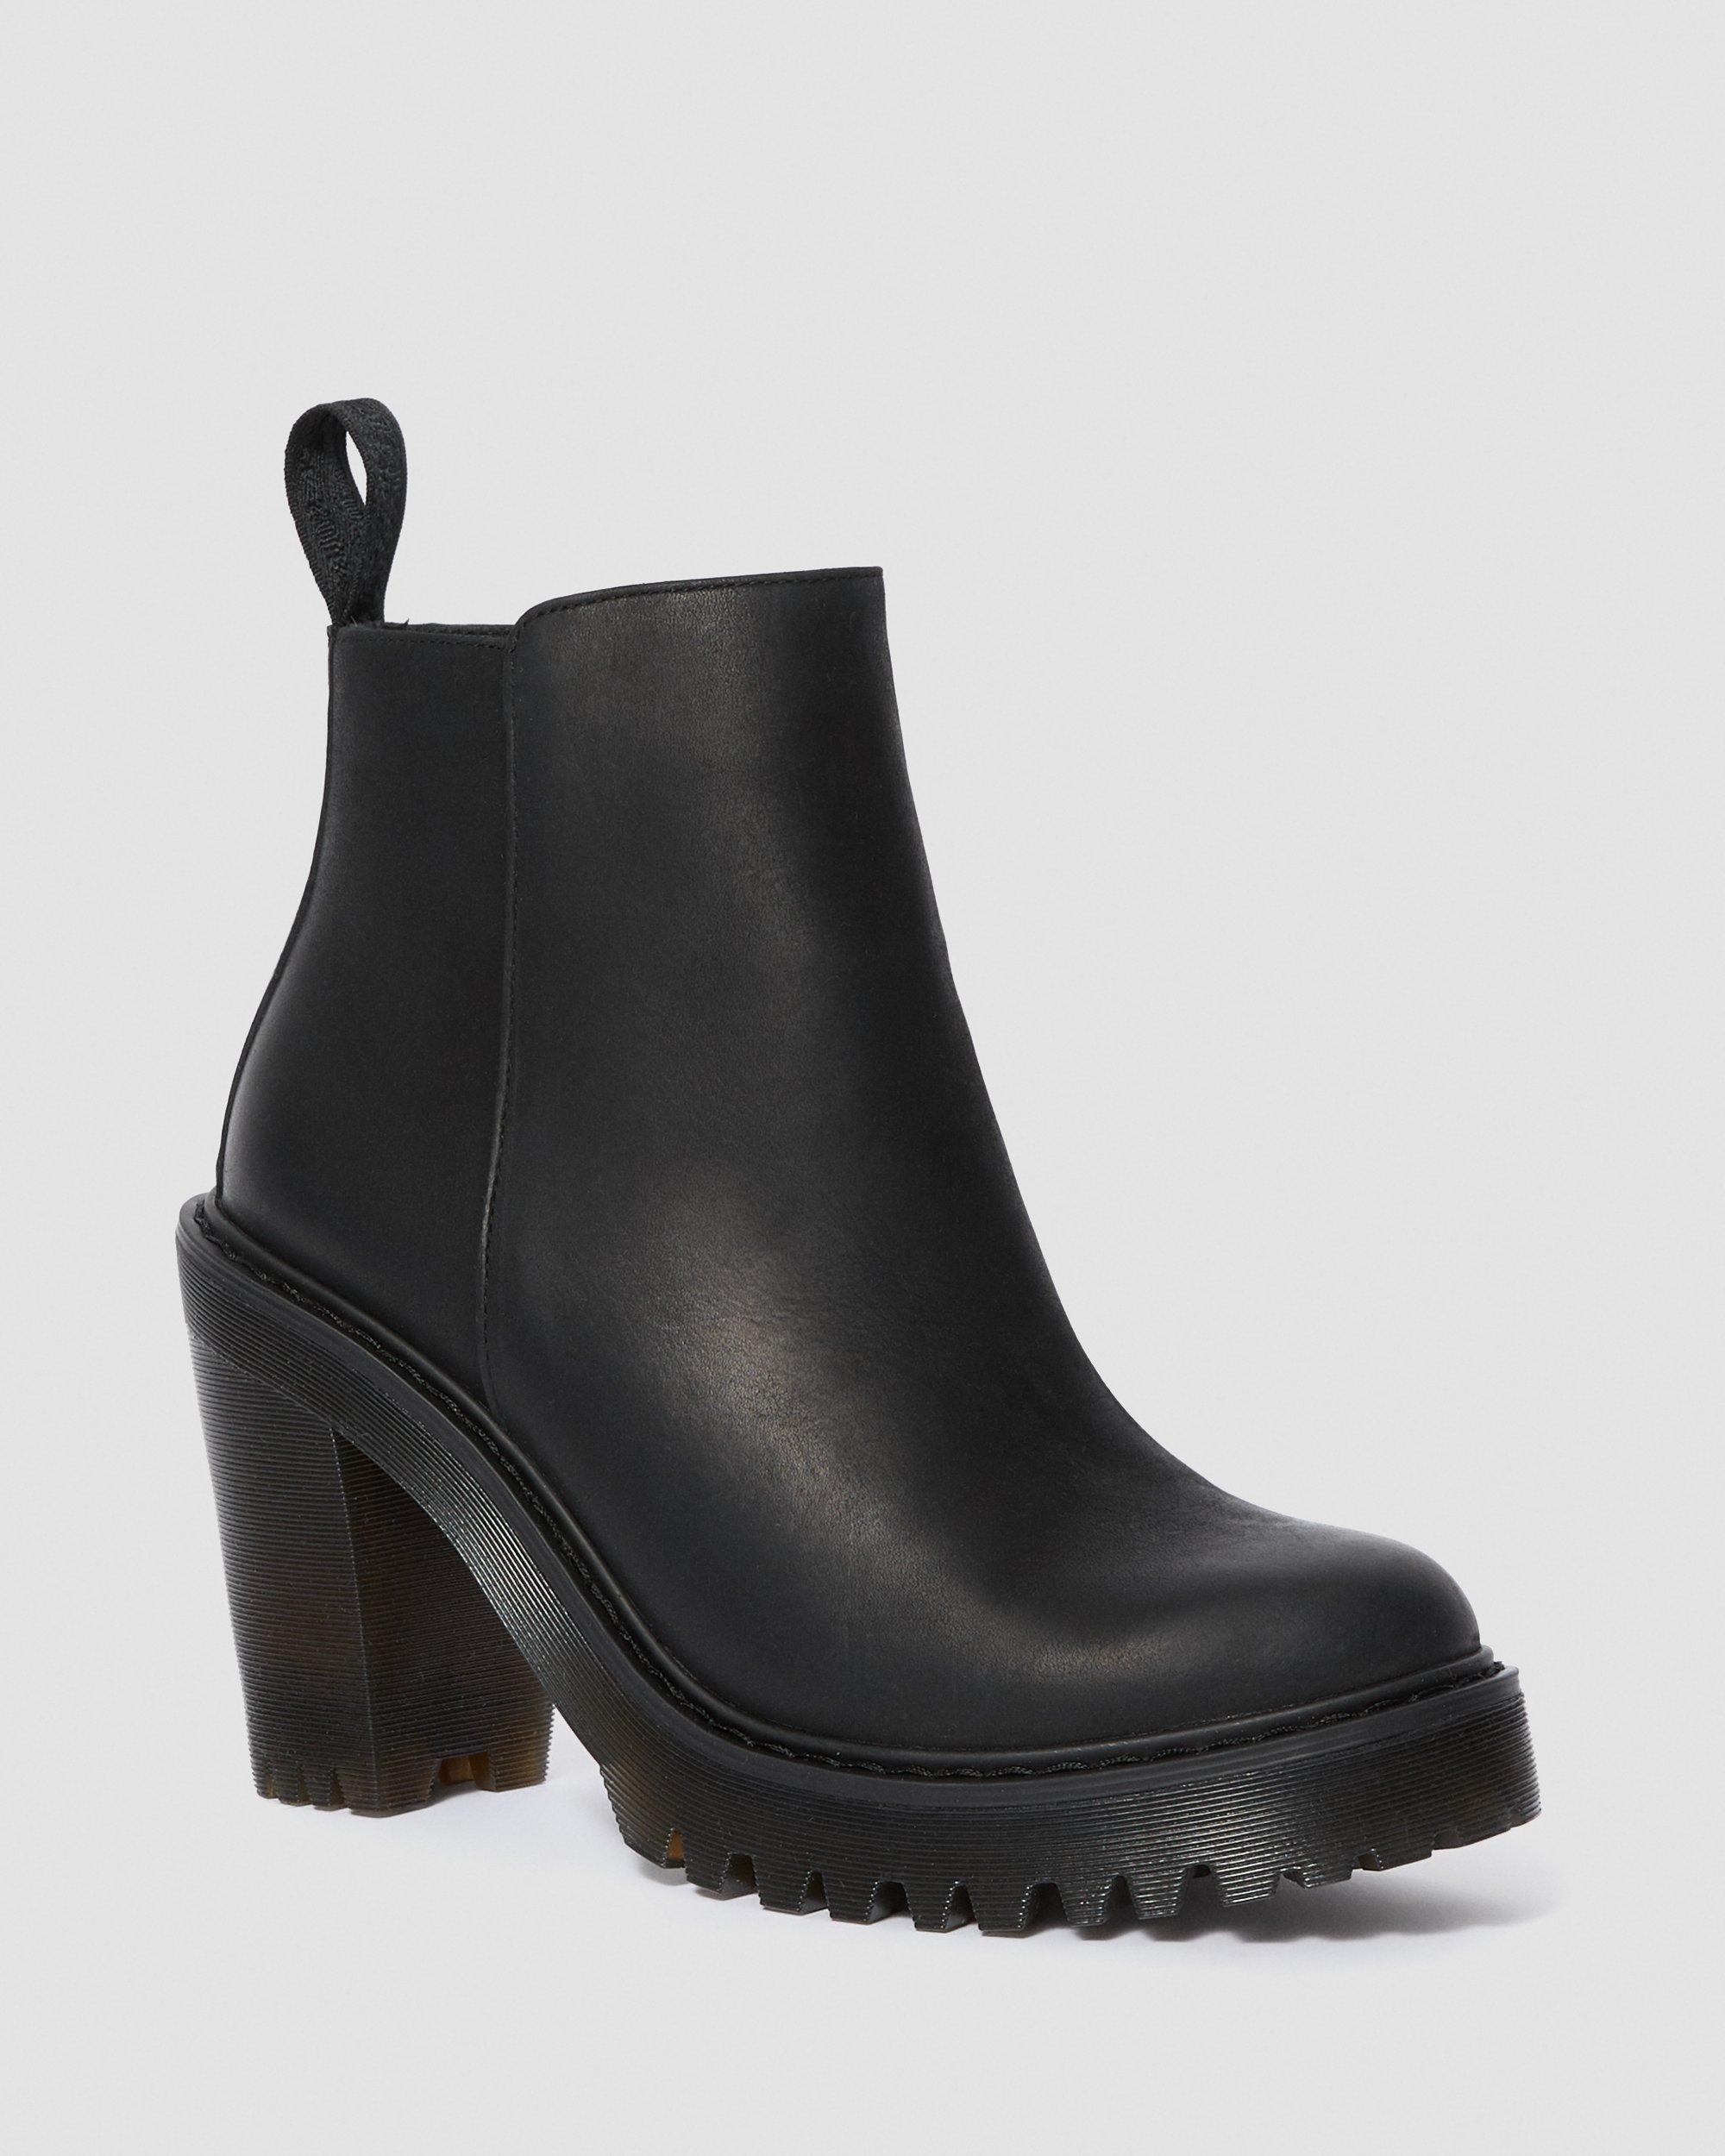 DR MARTENS Magdalena Women's Leather Heeled Chelsea Boots